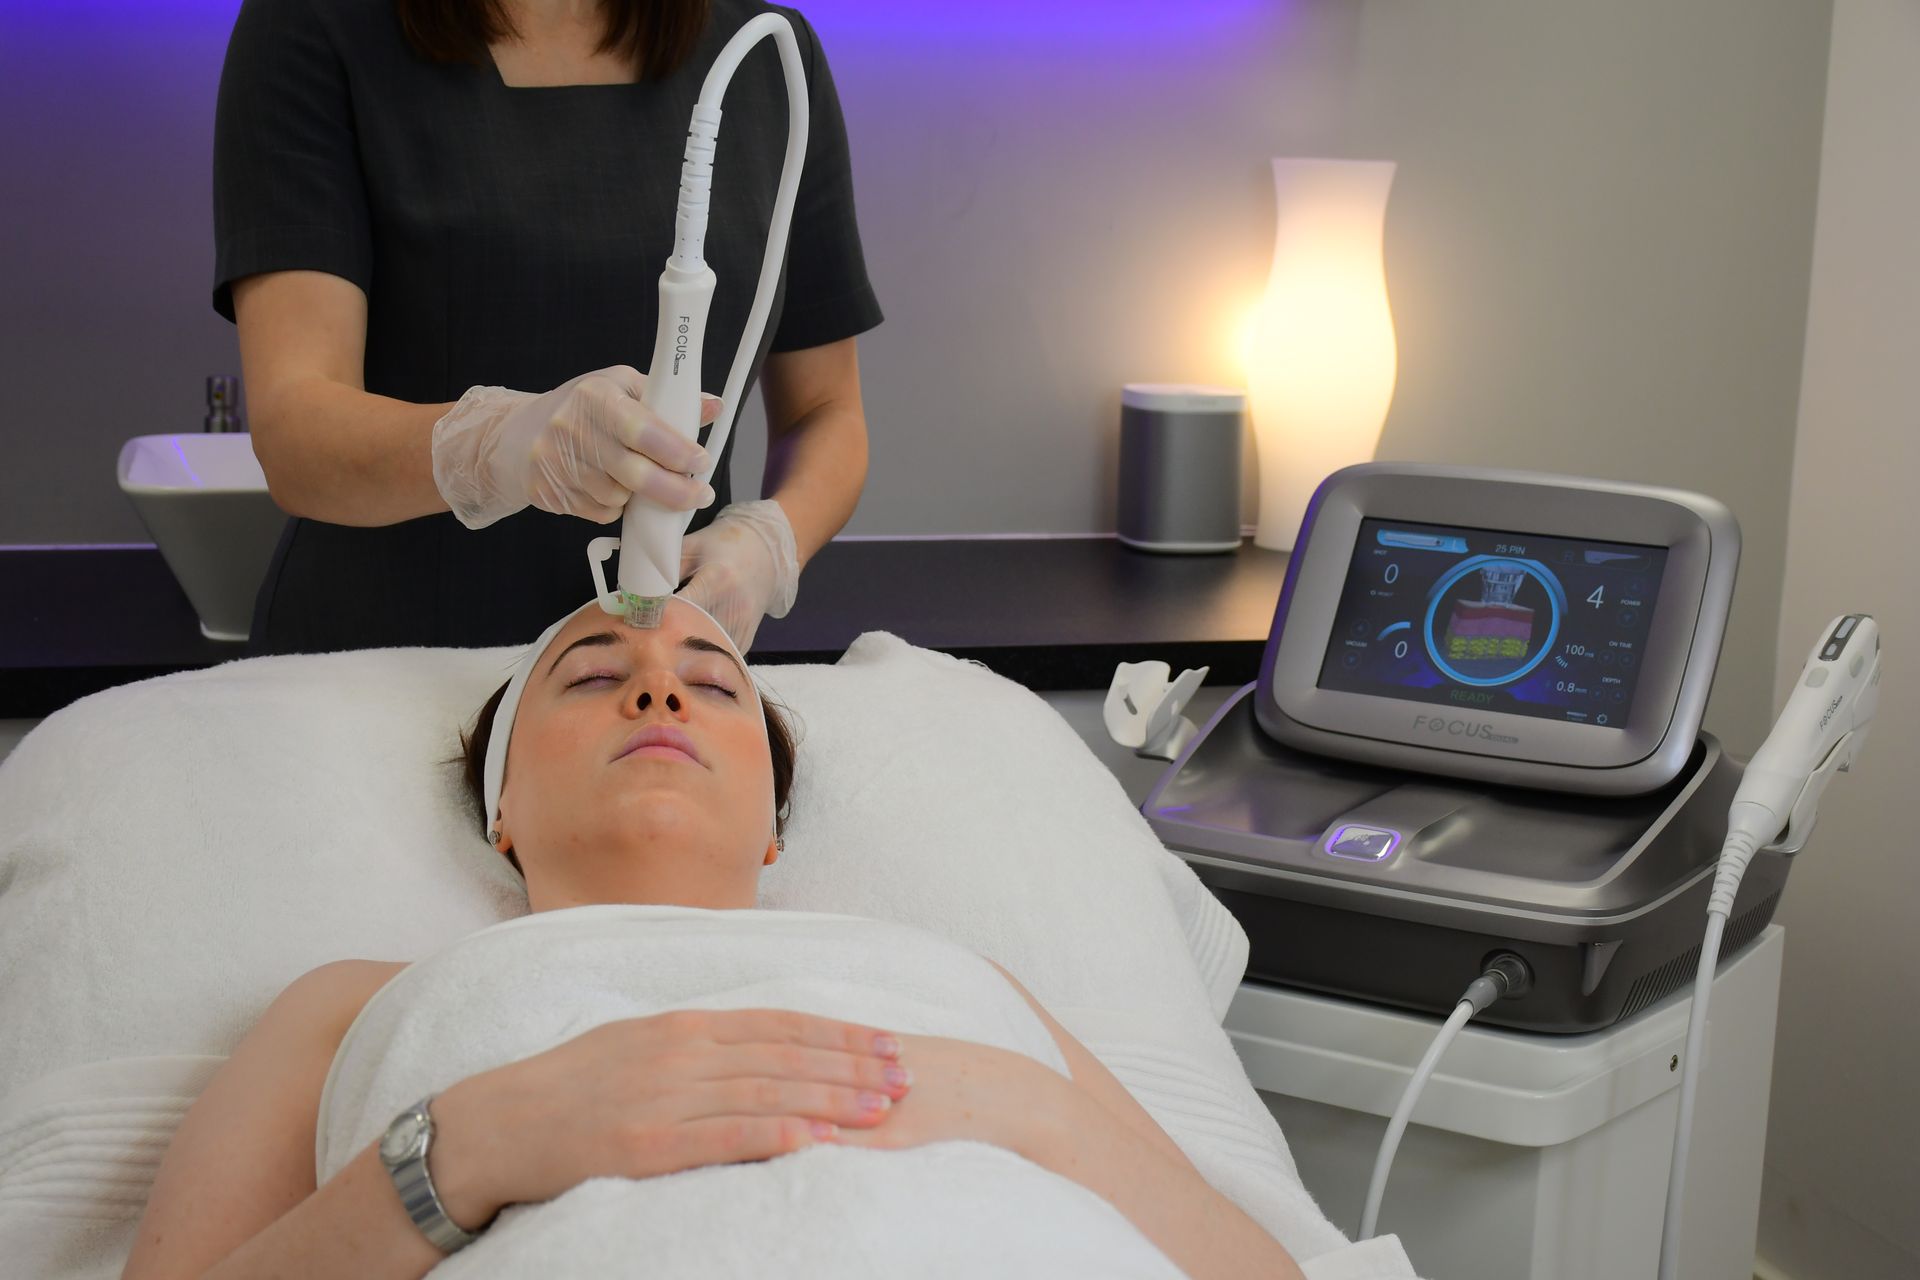 A Therapist performing Radiofrequency Microneedling with the Focus Dual® on the forehead and the Focus Dual® machine in the background